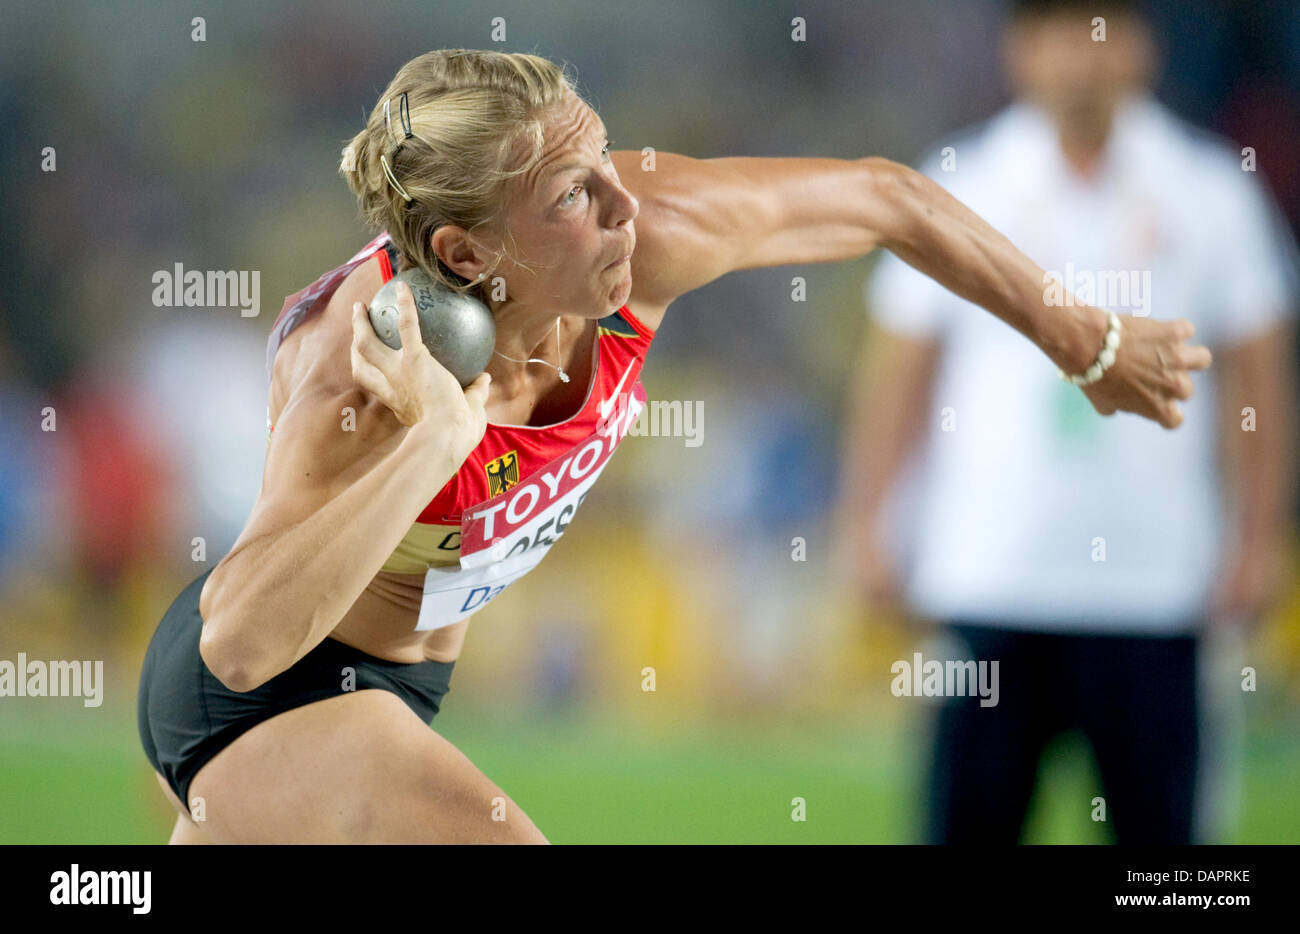 Jennifer Oeser of Germany competes in the Shot Put event of the Heptathlon competition at the 13th IAAF World Championships in Athletics in Daegu, Republic of Korea, 29 August 2011. Photo: Bernd Thissen dpa  +++(c) dpa - Bildfunk+++ Stock Photo